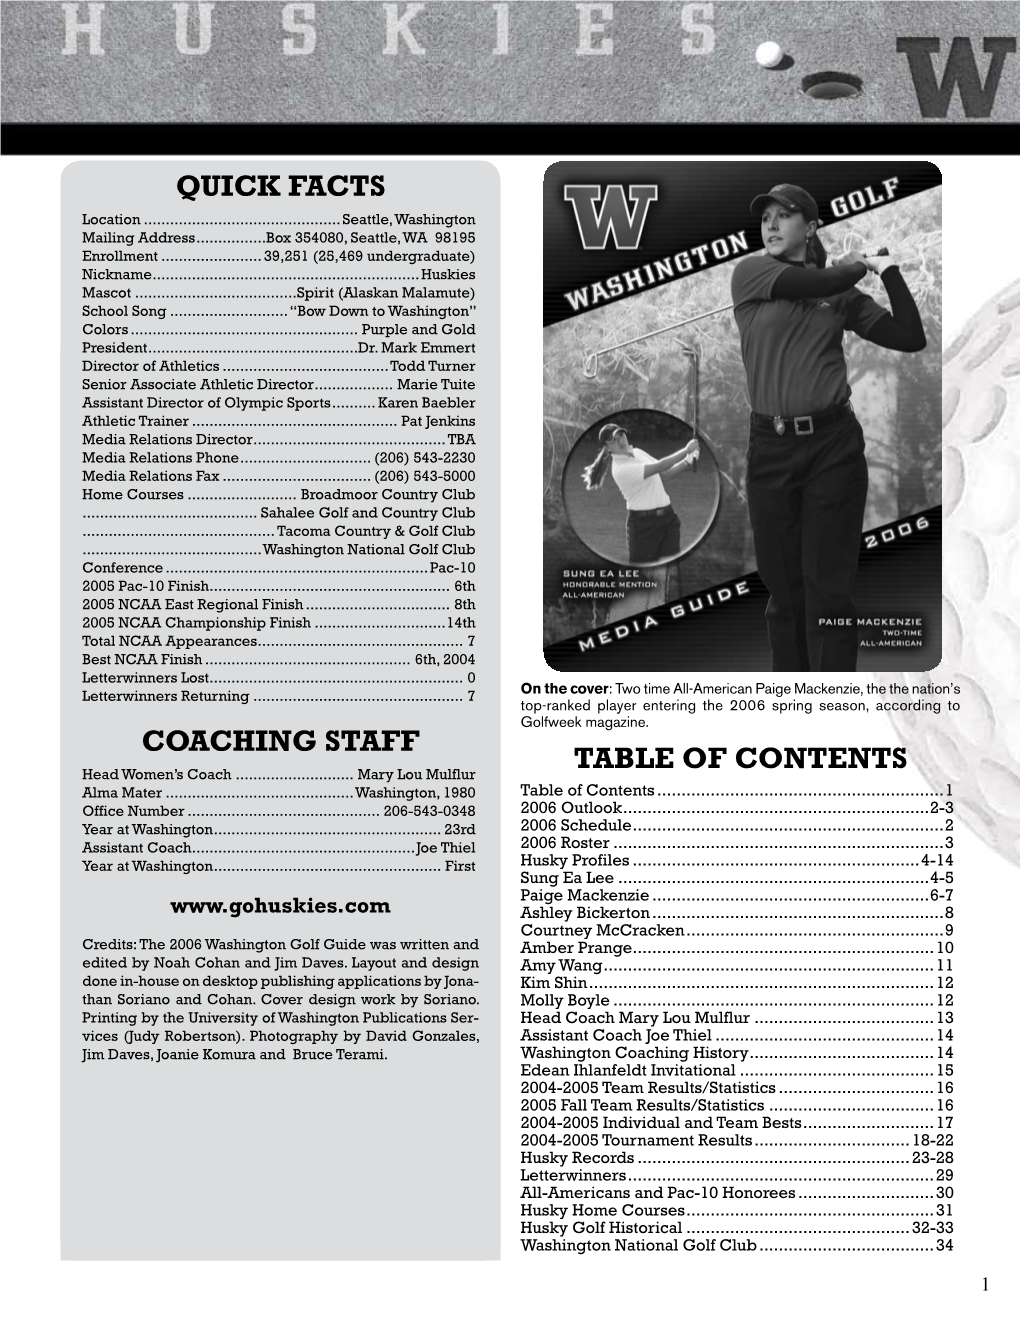 Quick Facts Coaching Staff Table of Contents